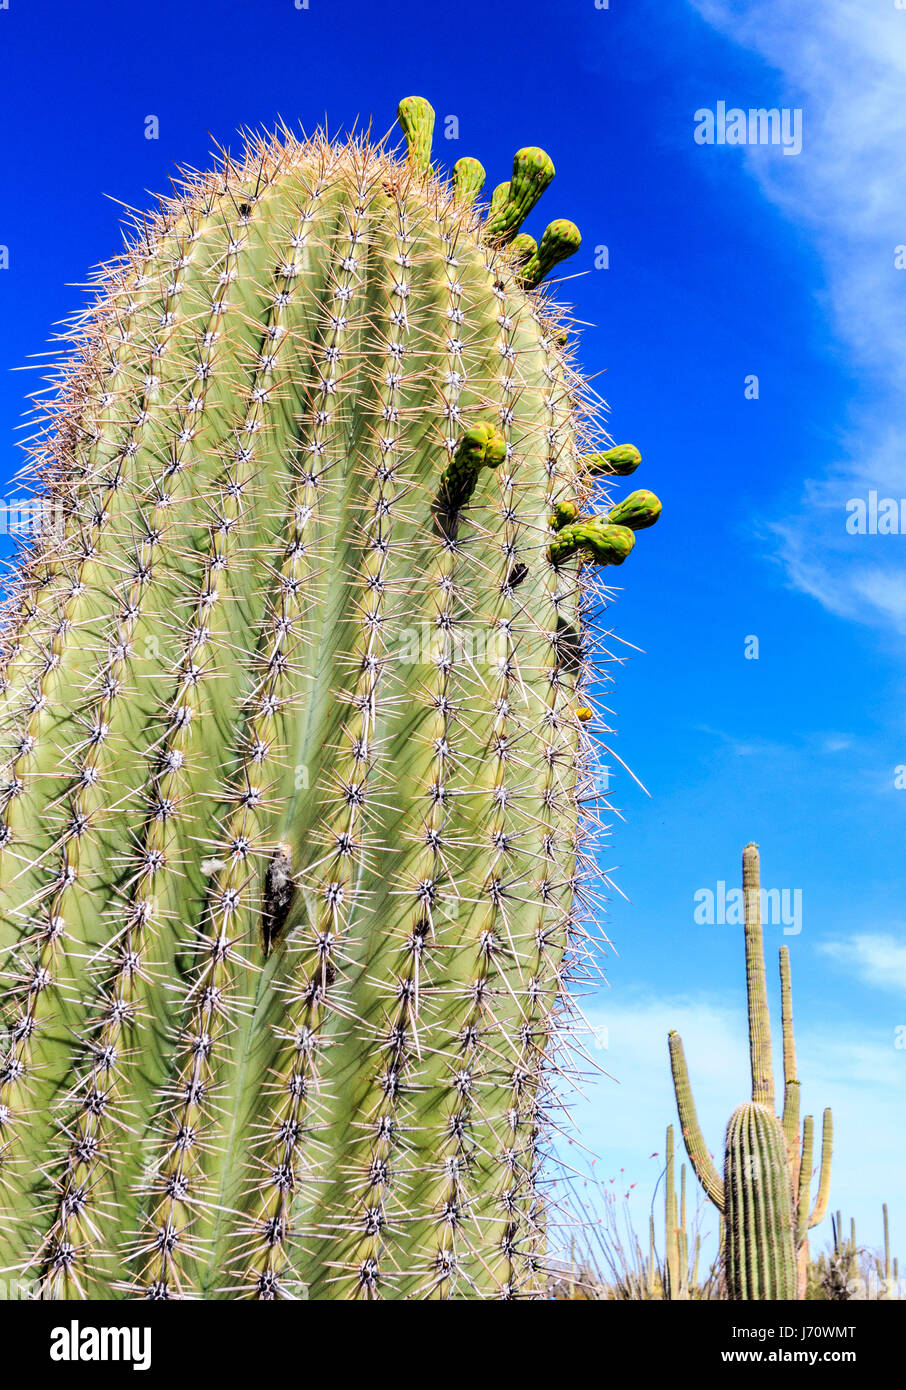 Buds of cactus flowers about to bloom on saguaro cactus. The saguaro is a tree-like cactus that can grow to be over 70 feet (21 m) tall. It is native  Stock Photo